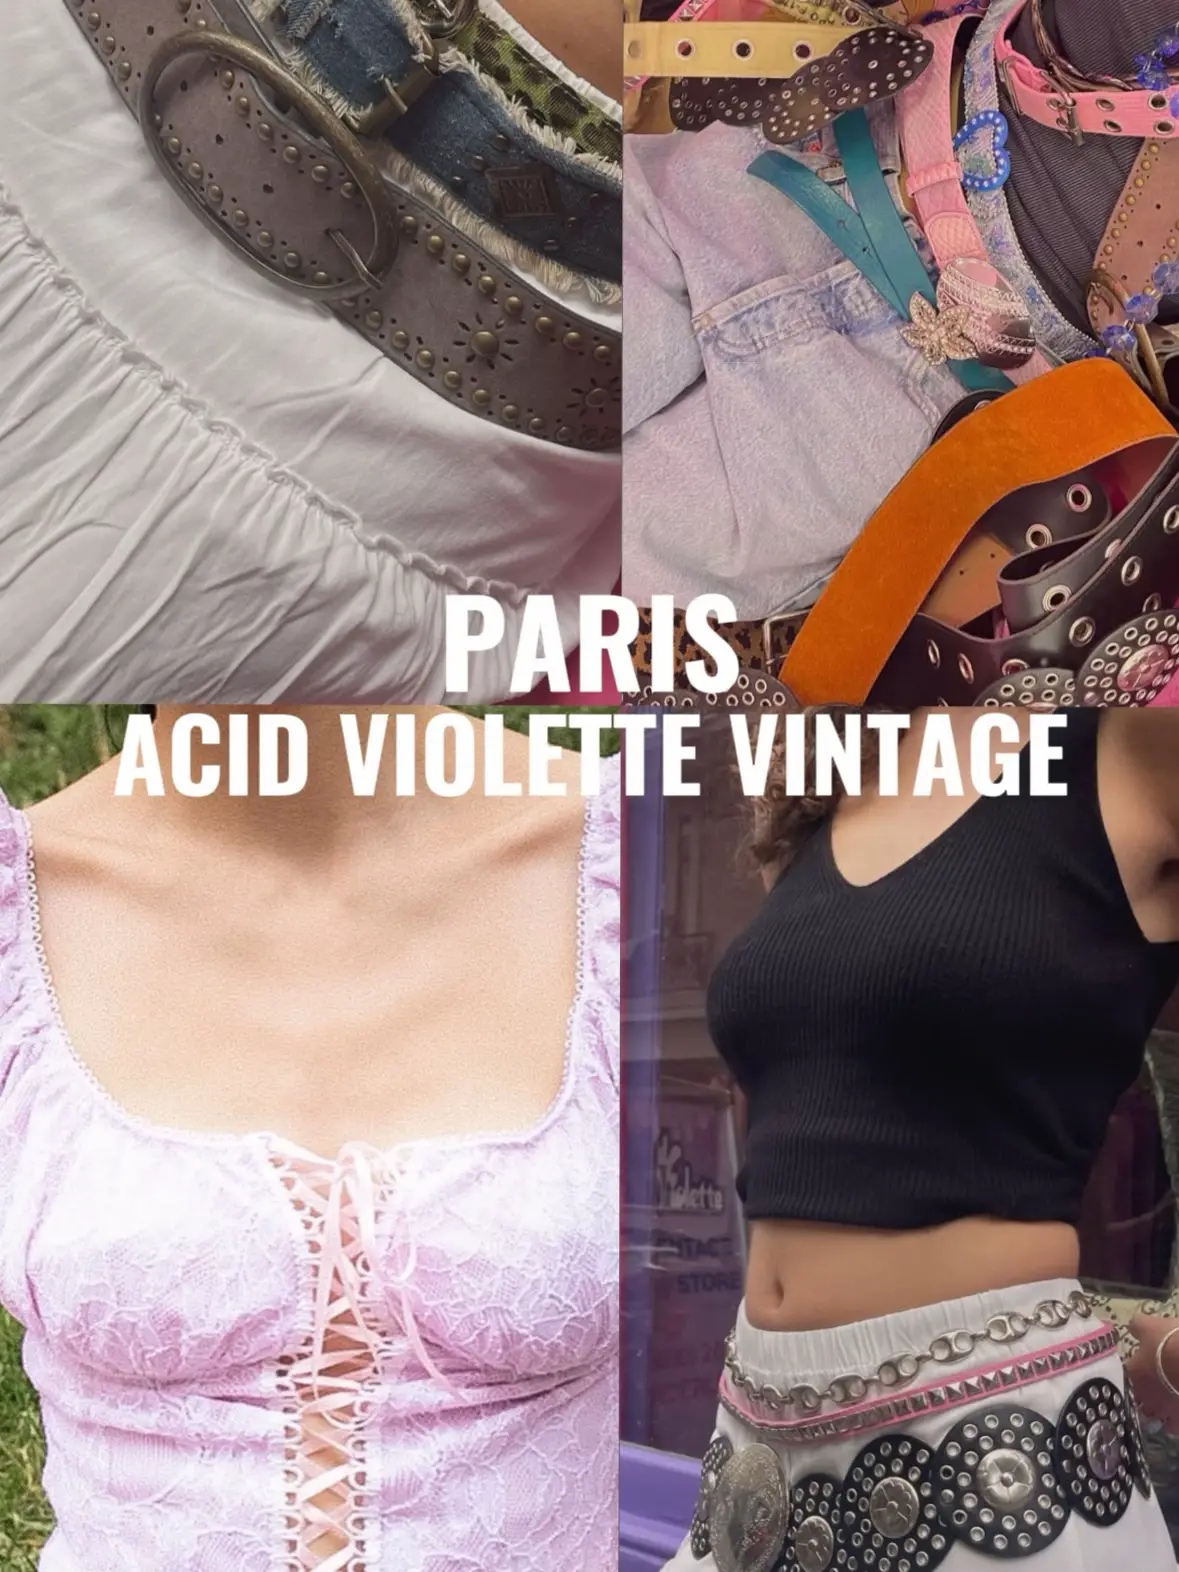 Largest Collection of Free-to-Edit #louisvuitton images on PicsArt